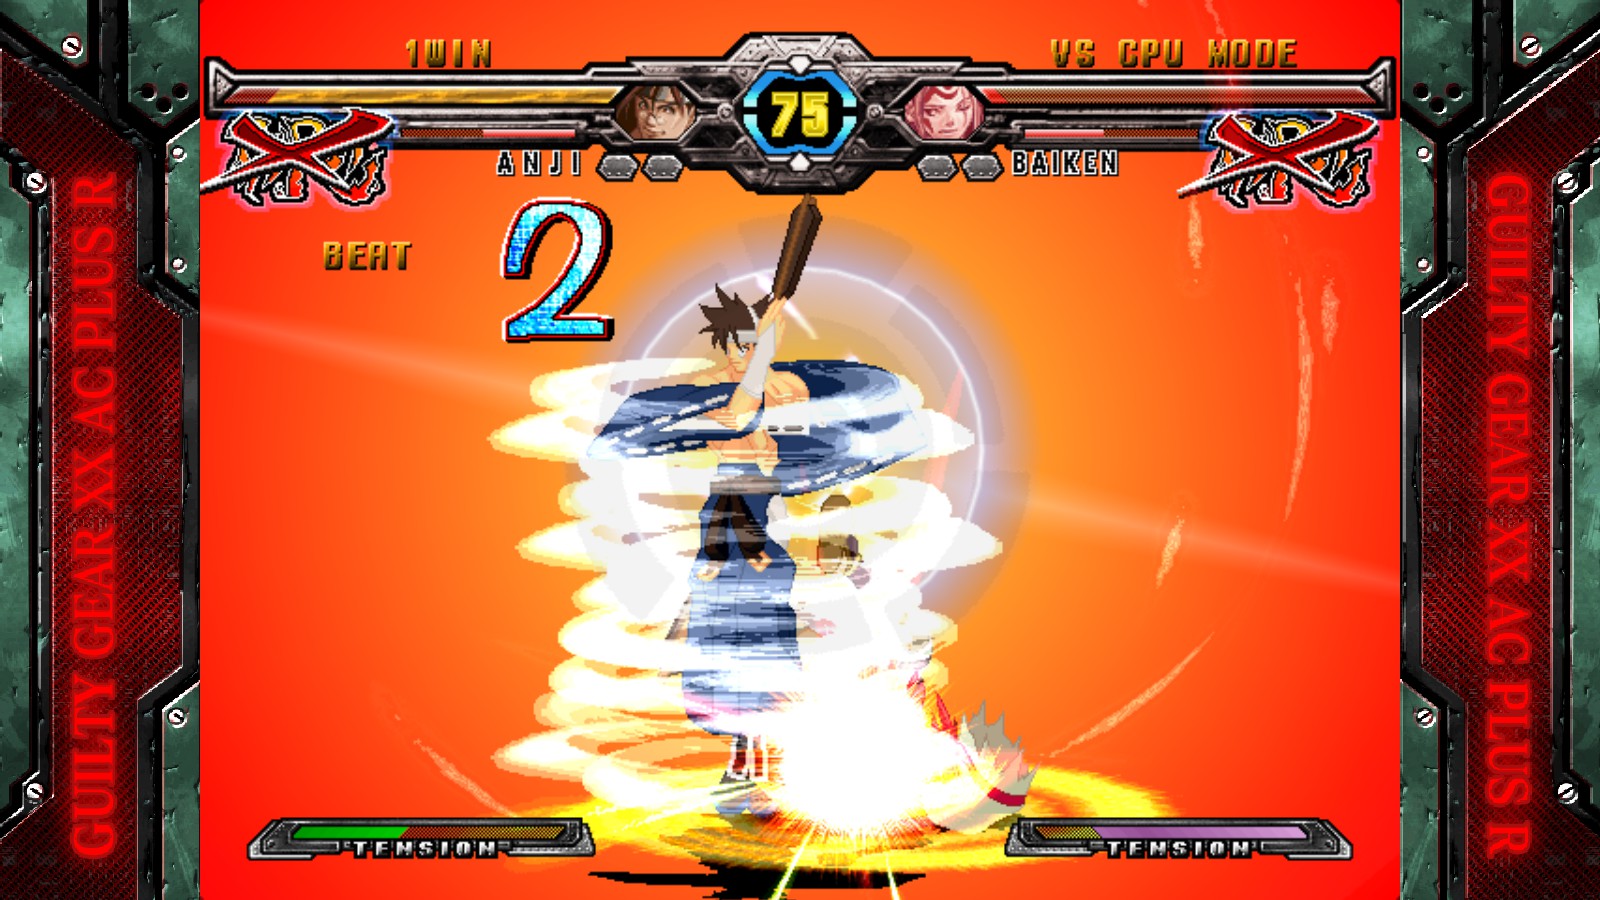 Guilty Gear Xx Accent Core Plus R On Steam